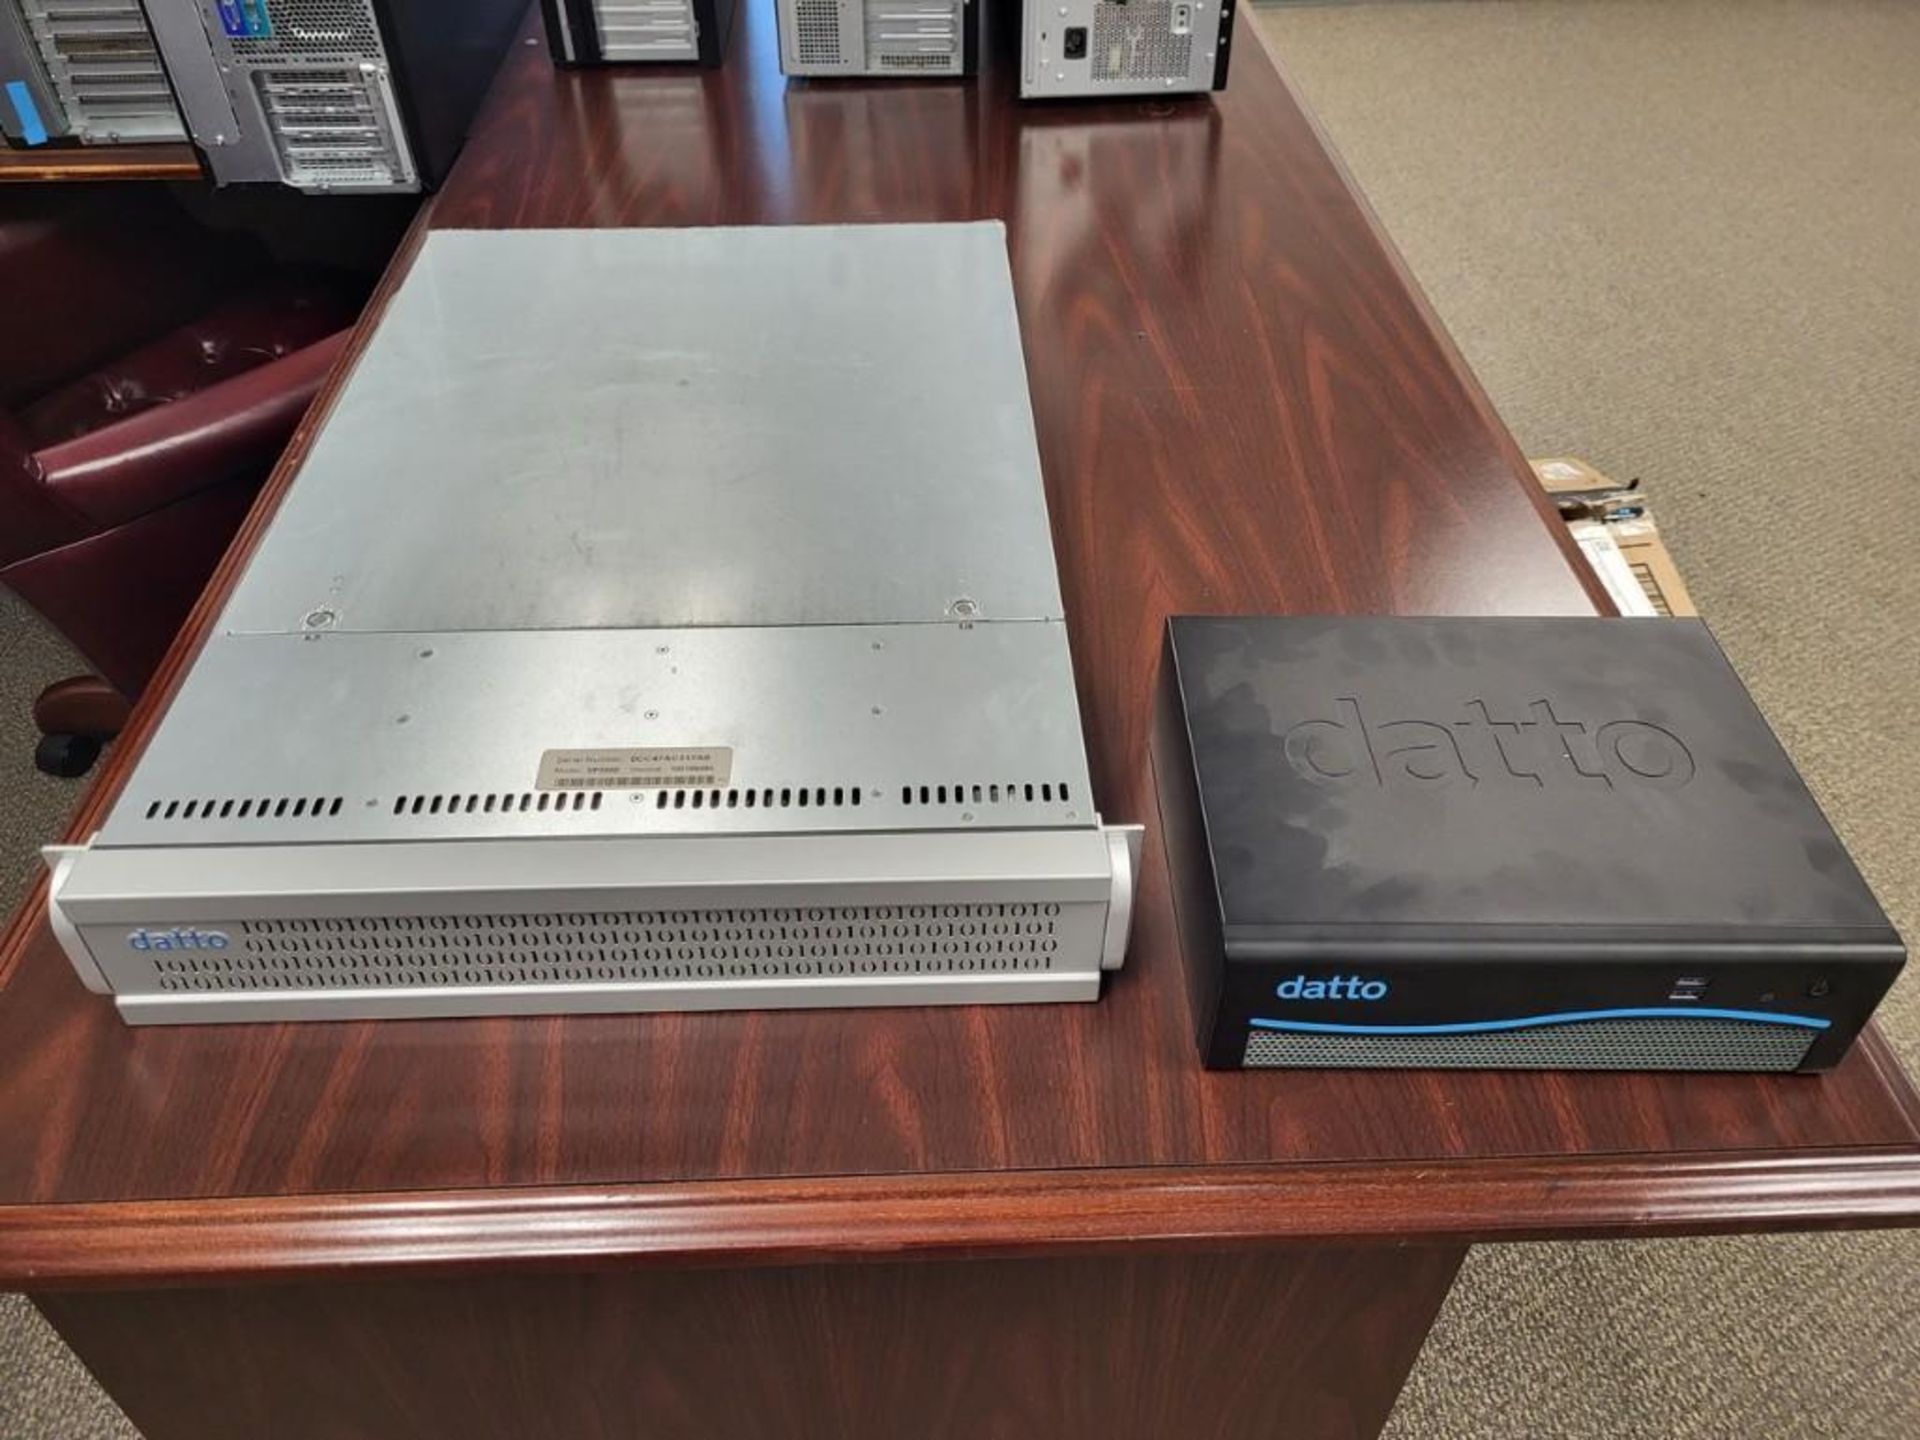 Datto model SP3000 Server and Data Storage Unit